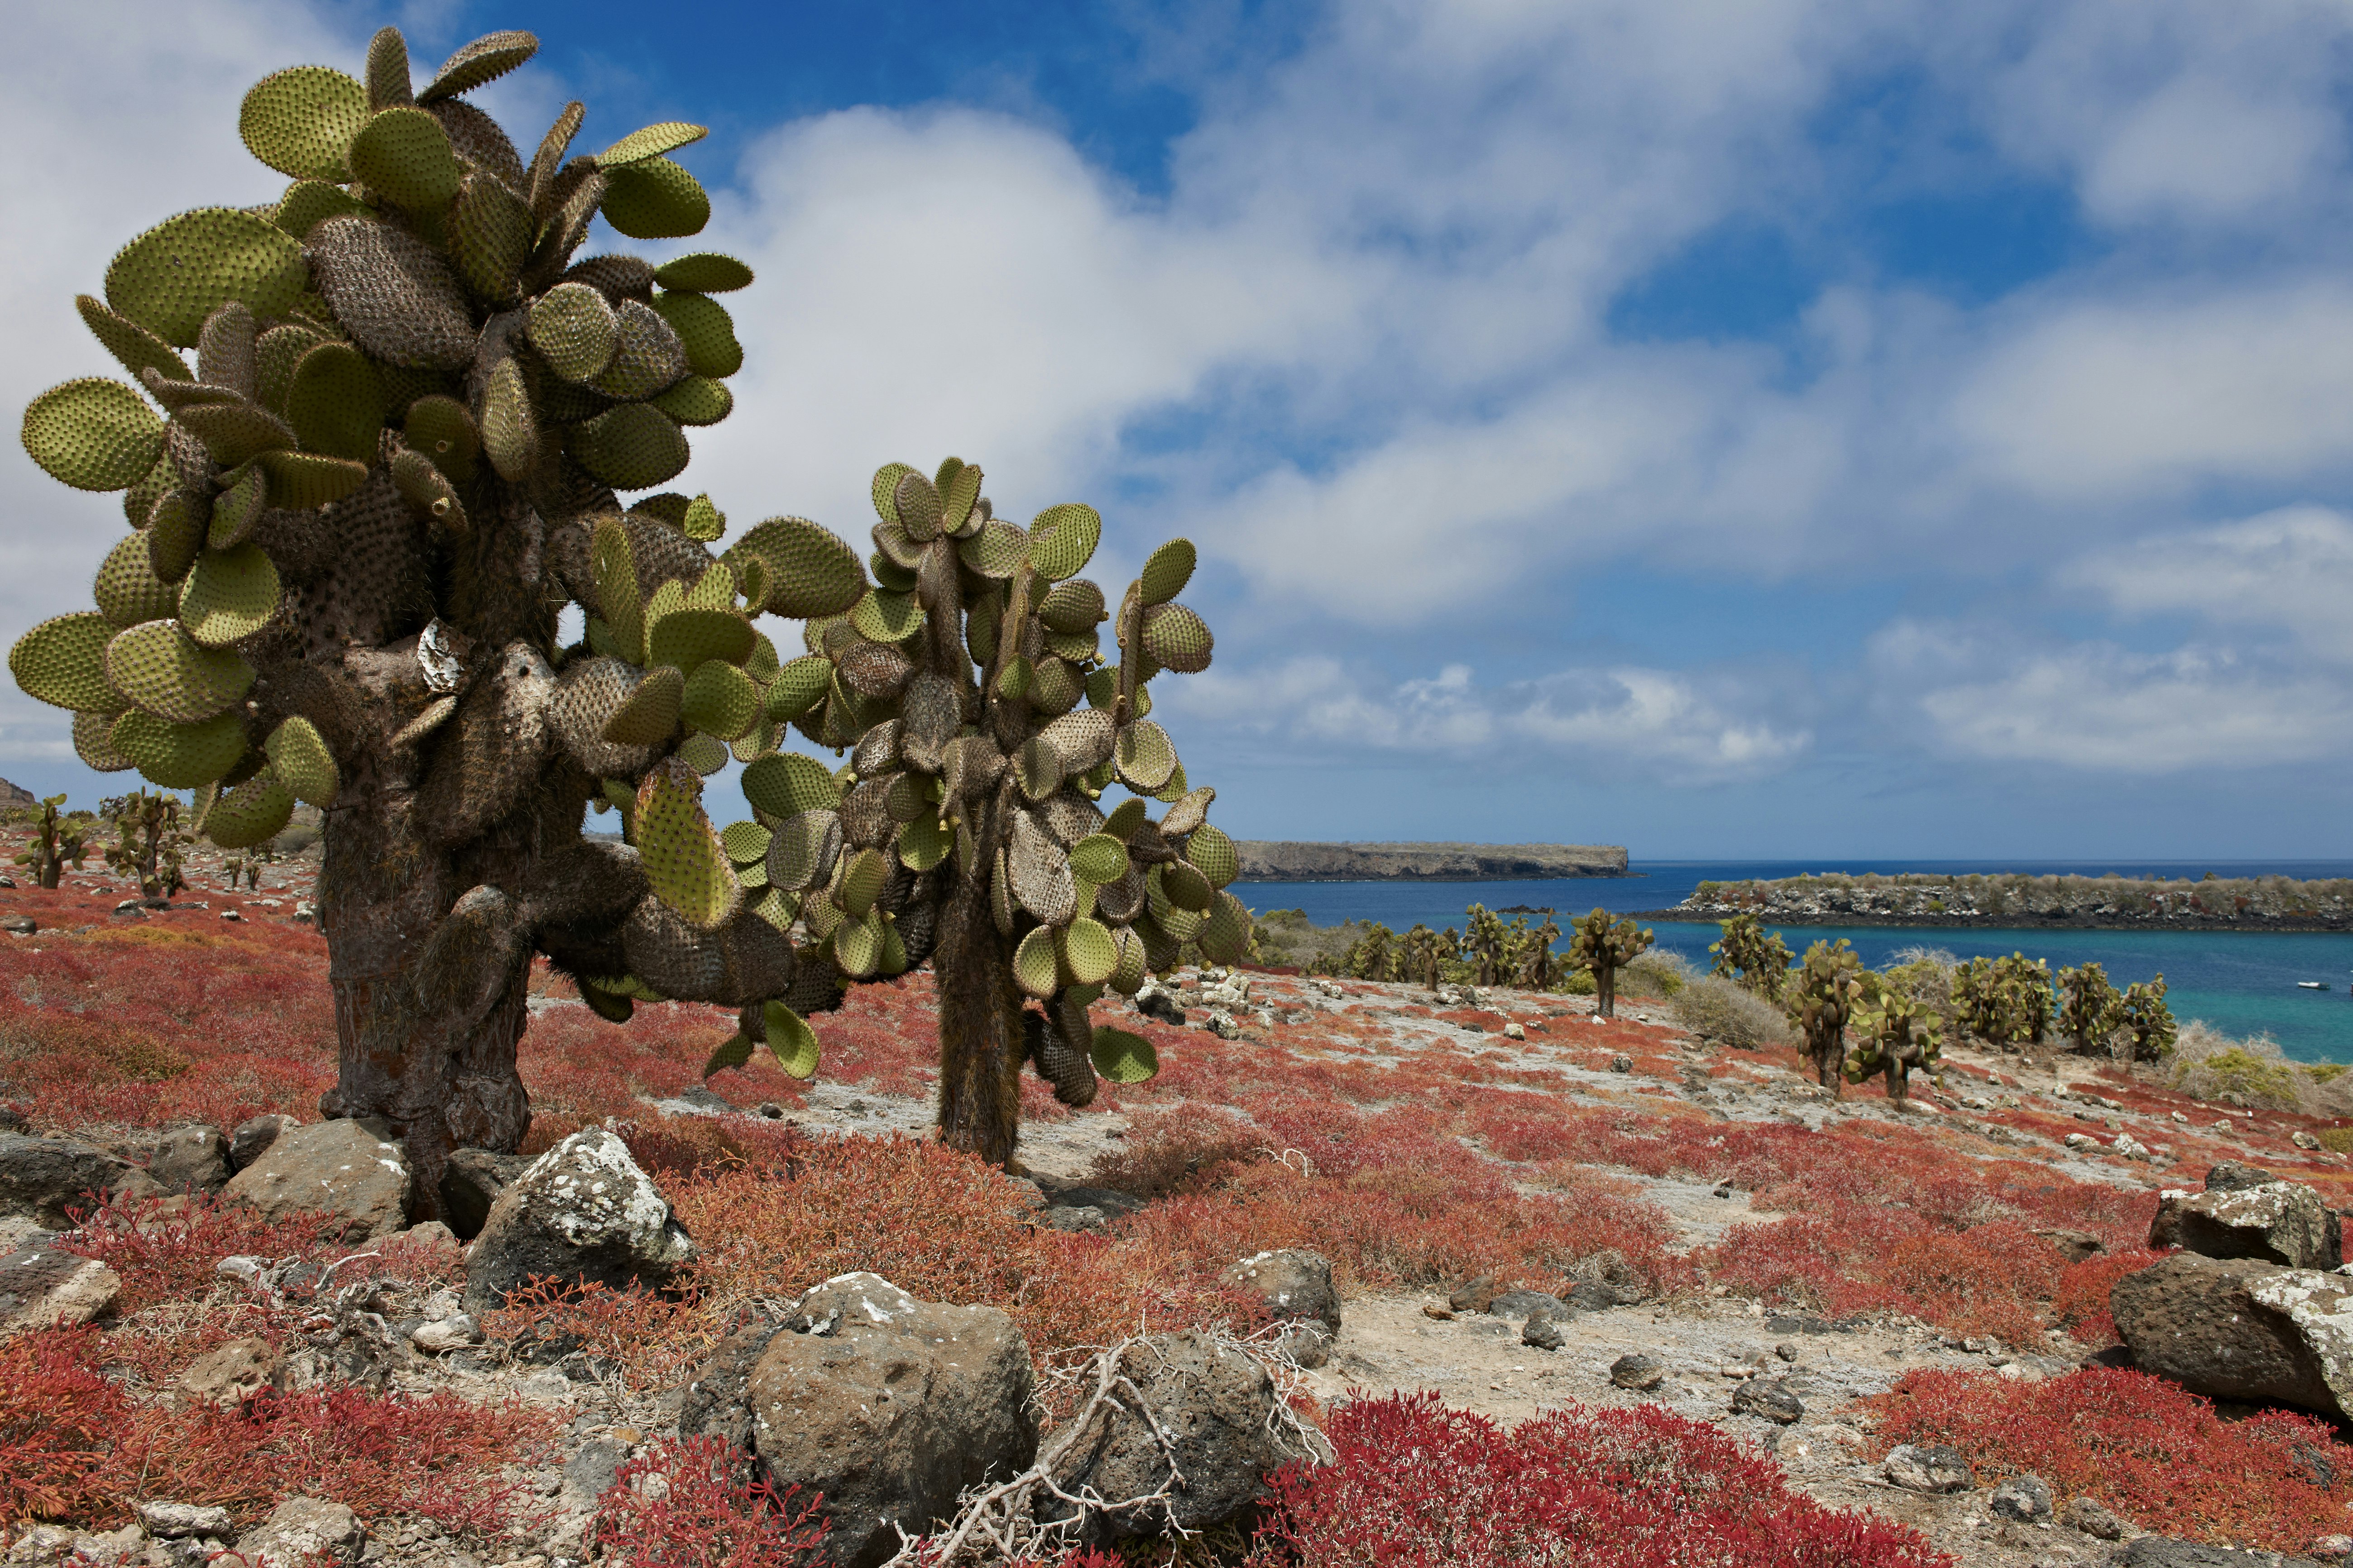 Vivid pinks, greens and purples color the landscape of the Galapagos all the way down to the blue ocean